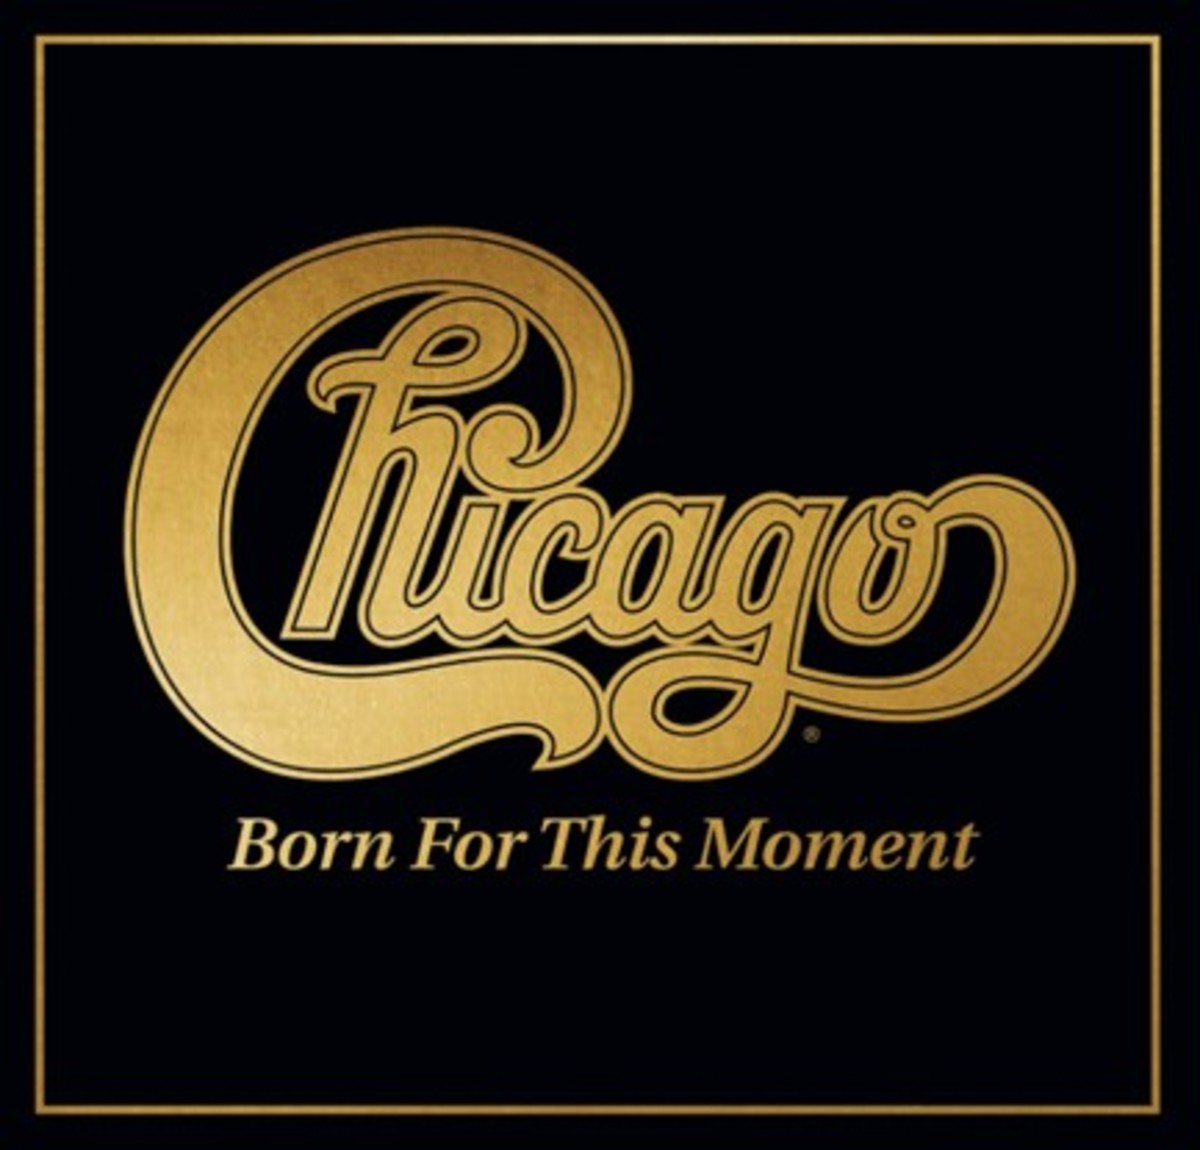 From Chicago Records/BMG on vinyl, CD and digital formats